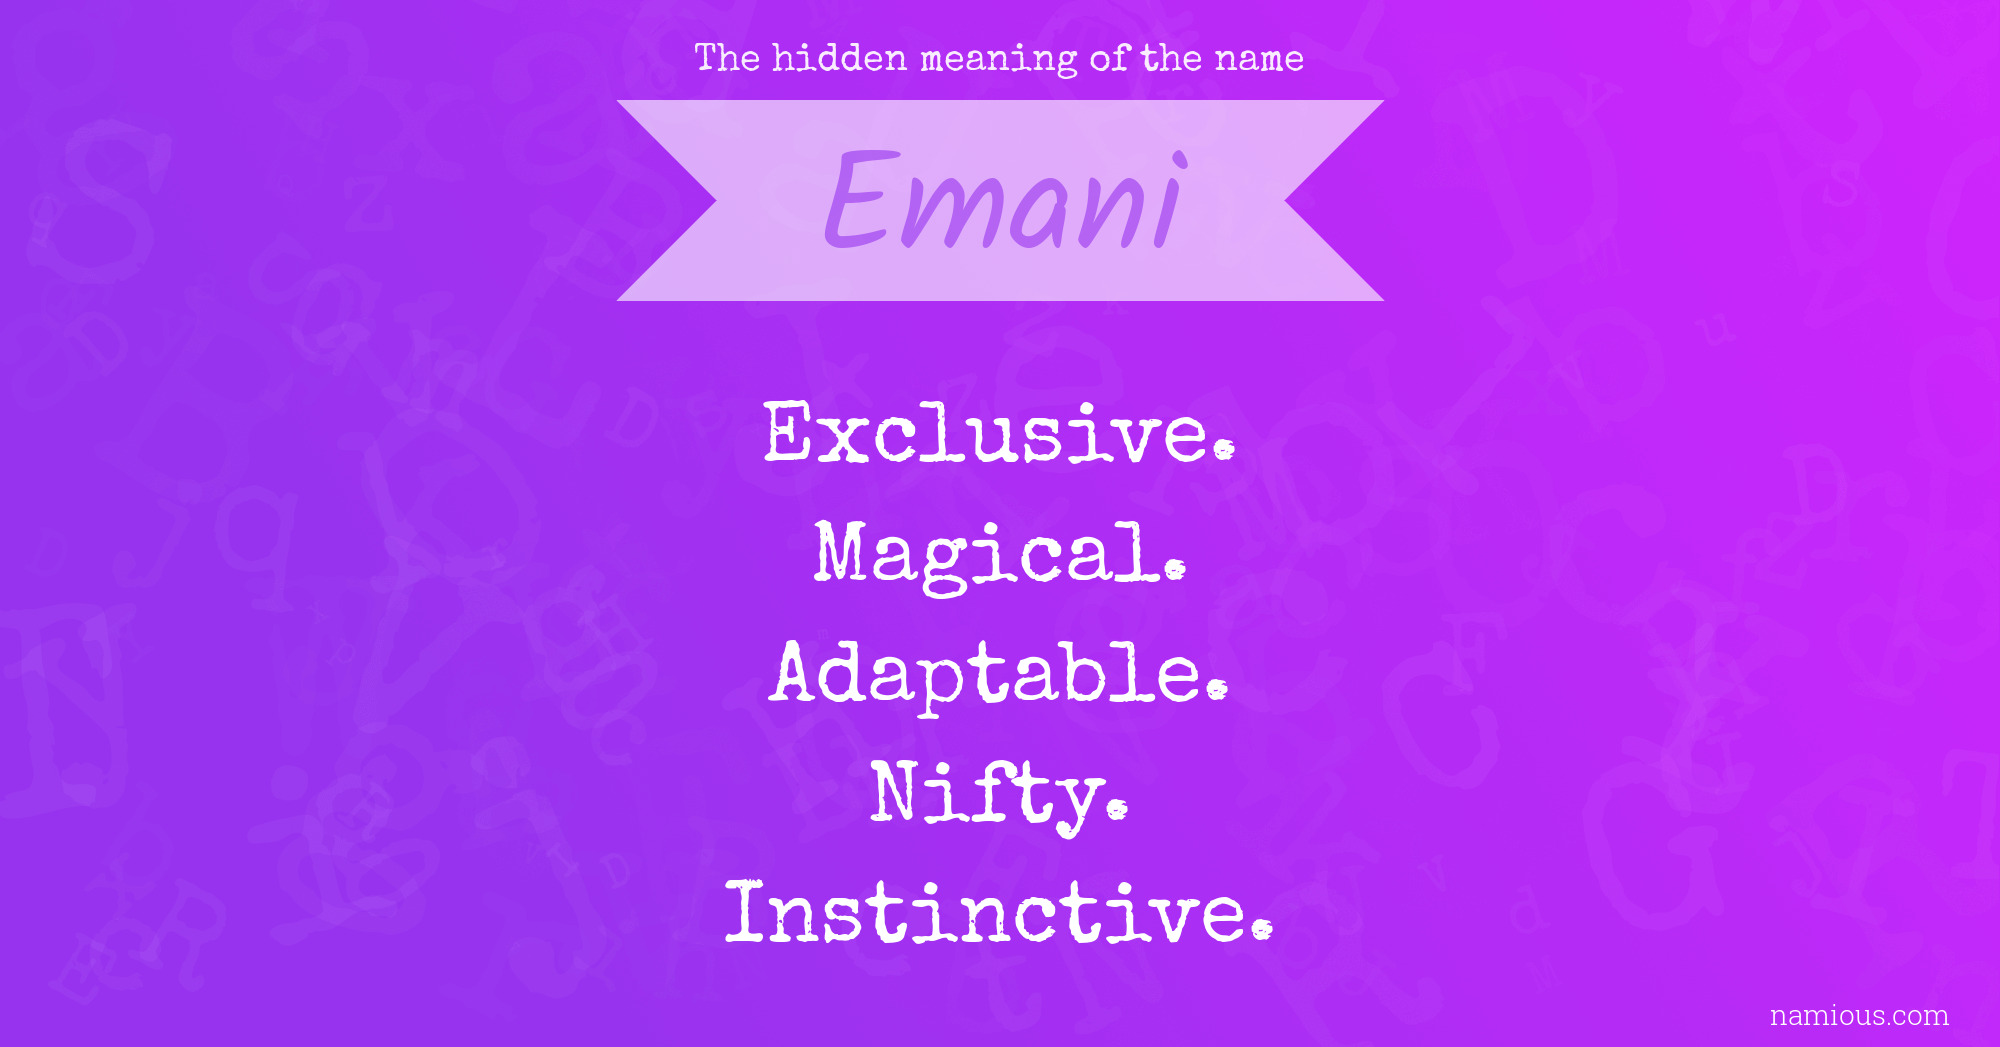 The hidden meaning of the name Emani